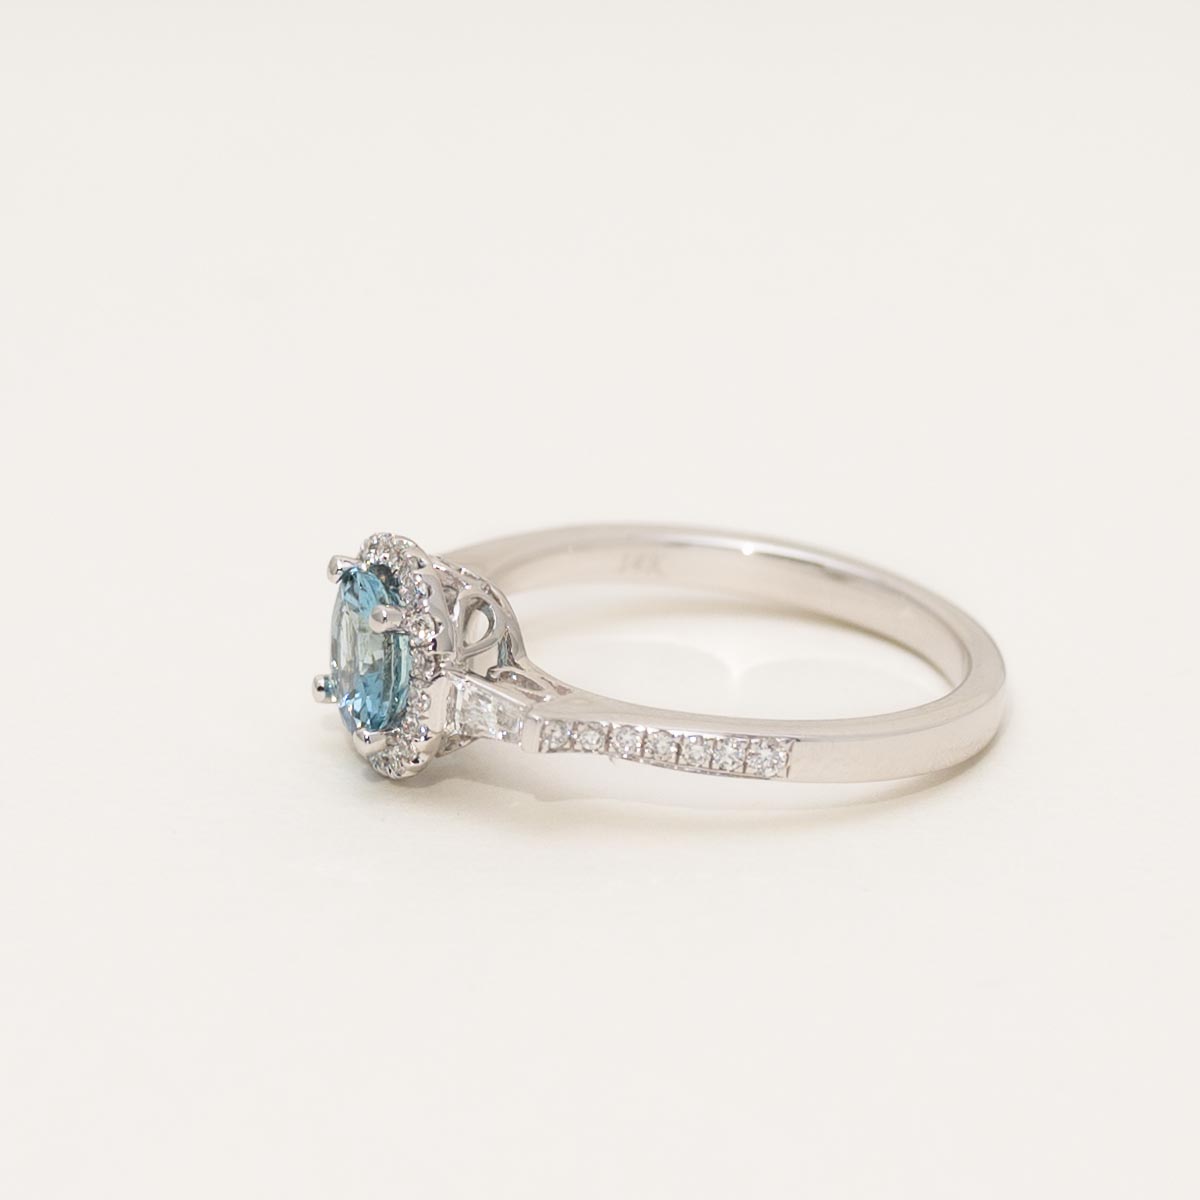 Aquamarine Halo Ring in 14kt White Gold with Diamonds (1/4ct tw)